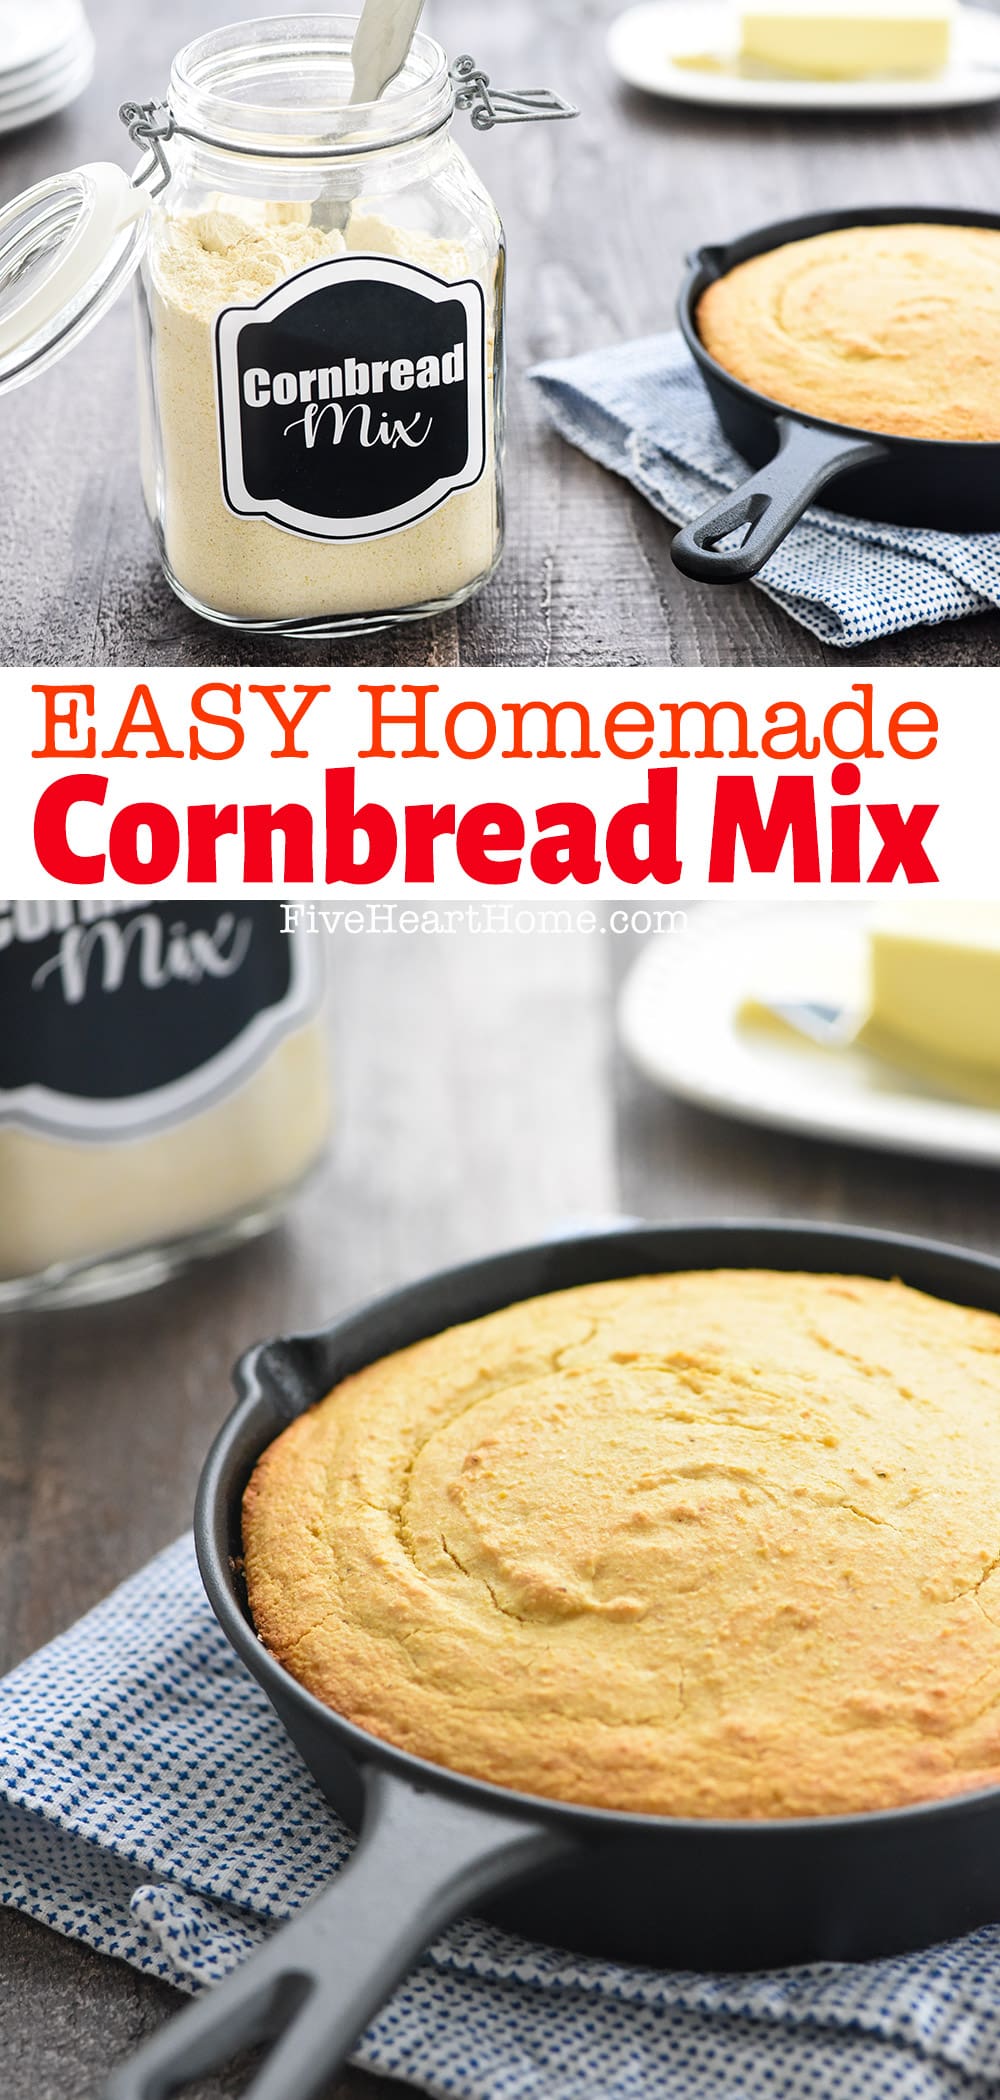 Homemade Cornbread Mix ~ this quick and easy, from-scratch dry mix is not only a convenient time saver to keep in the pantry, but it's also versatile enough to be used in a variety of recipes and it avoids the artificial ingredients often found in store-bought cornbread mix! | FiveHeartHome.com via @fivehearthome